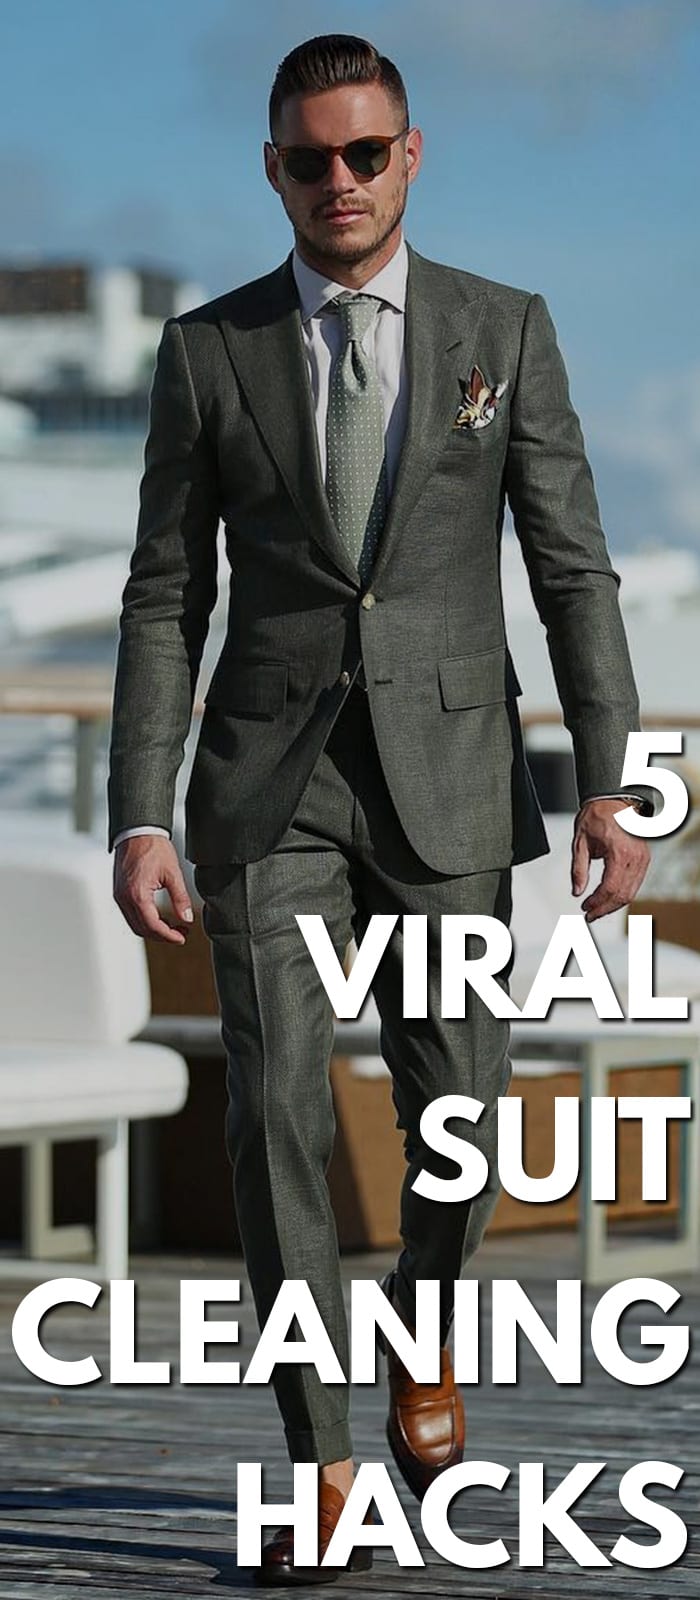 5 Viral Suit Cleaning Hacks